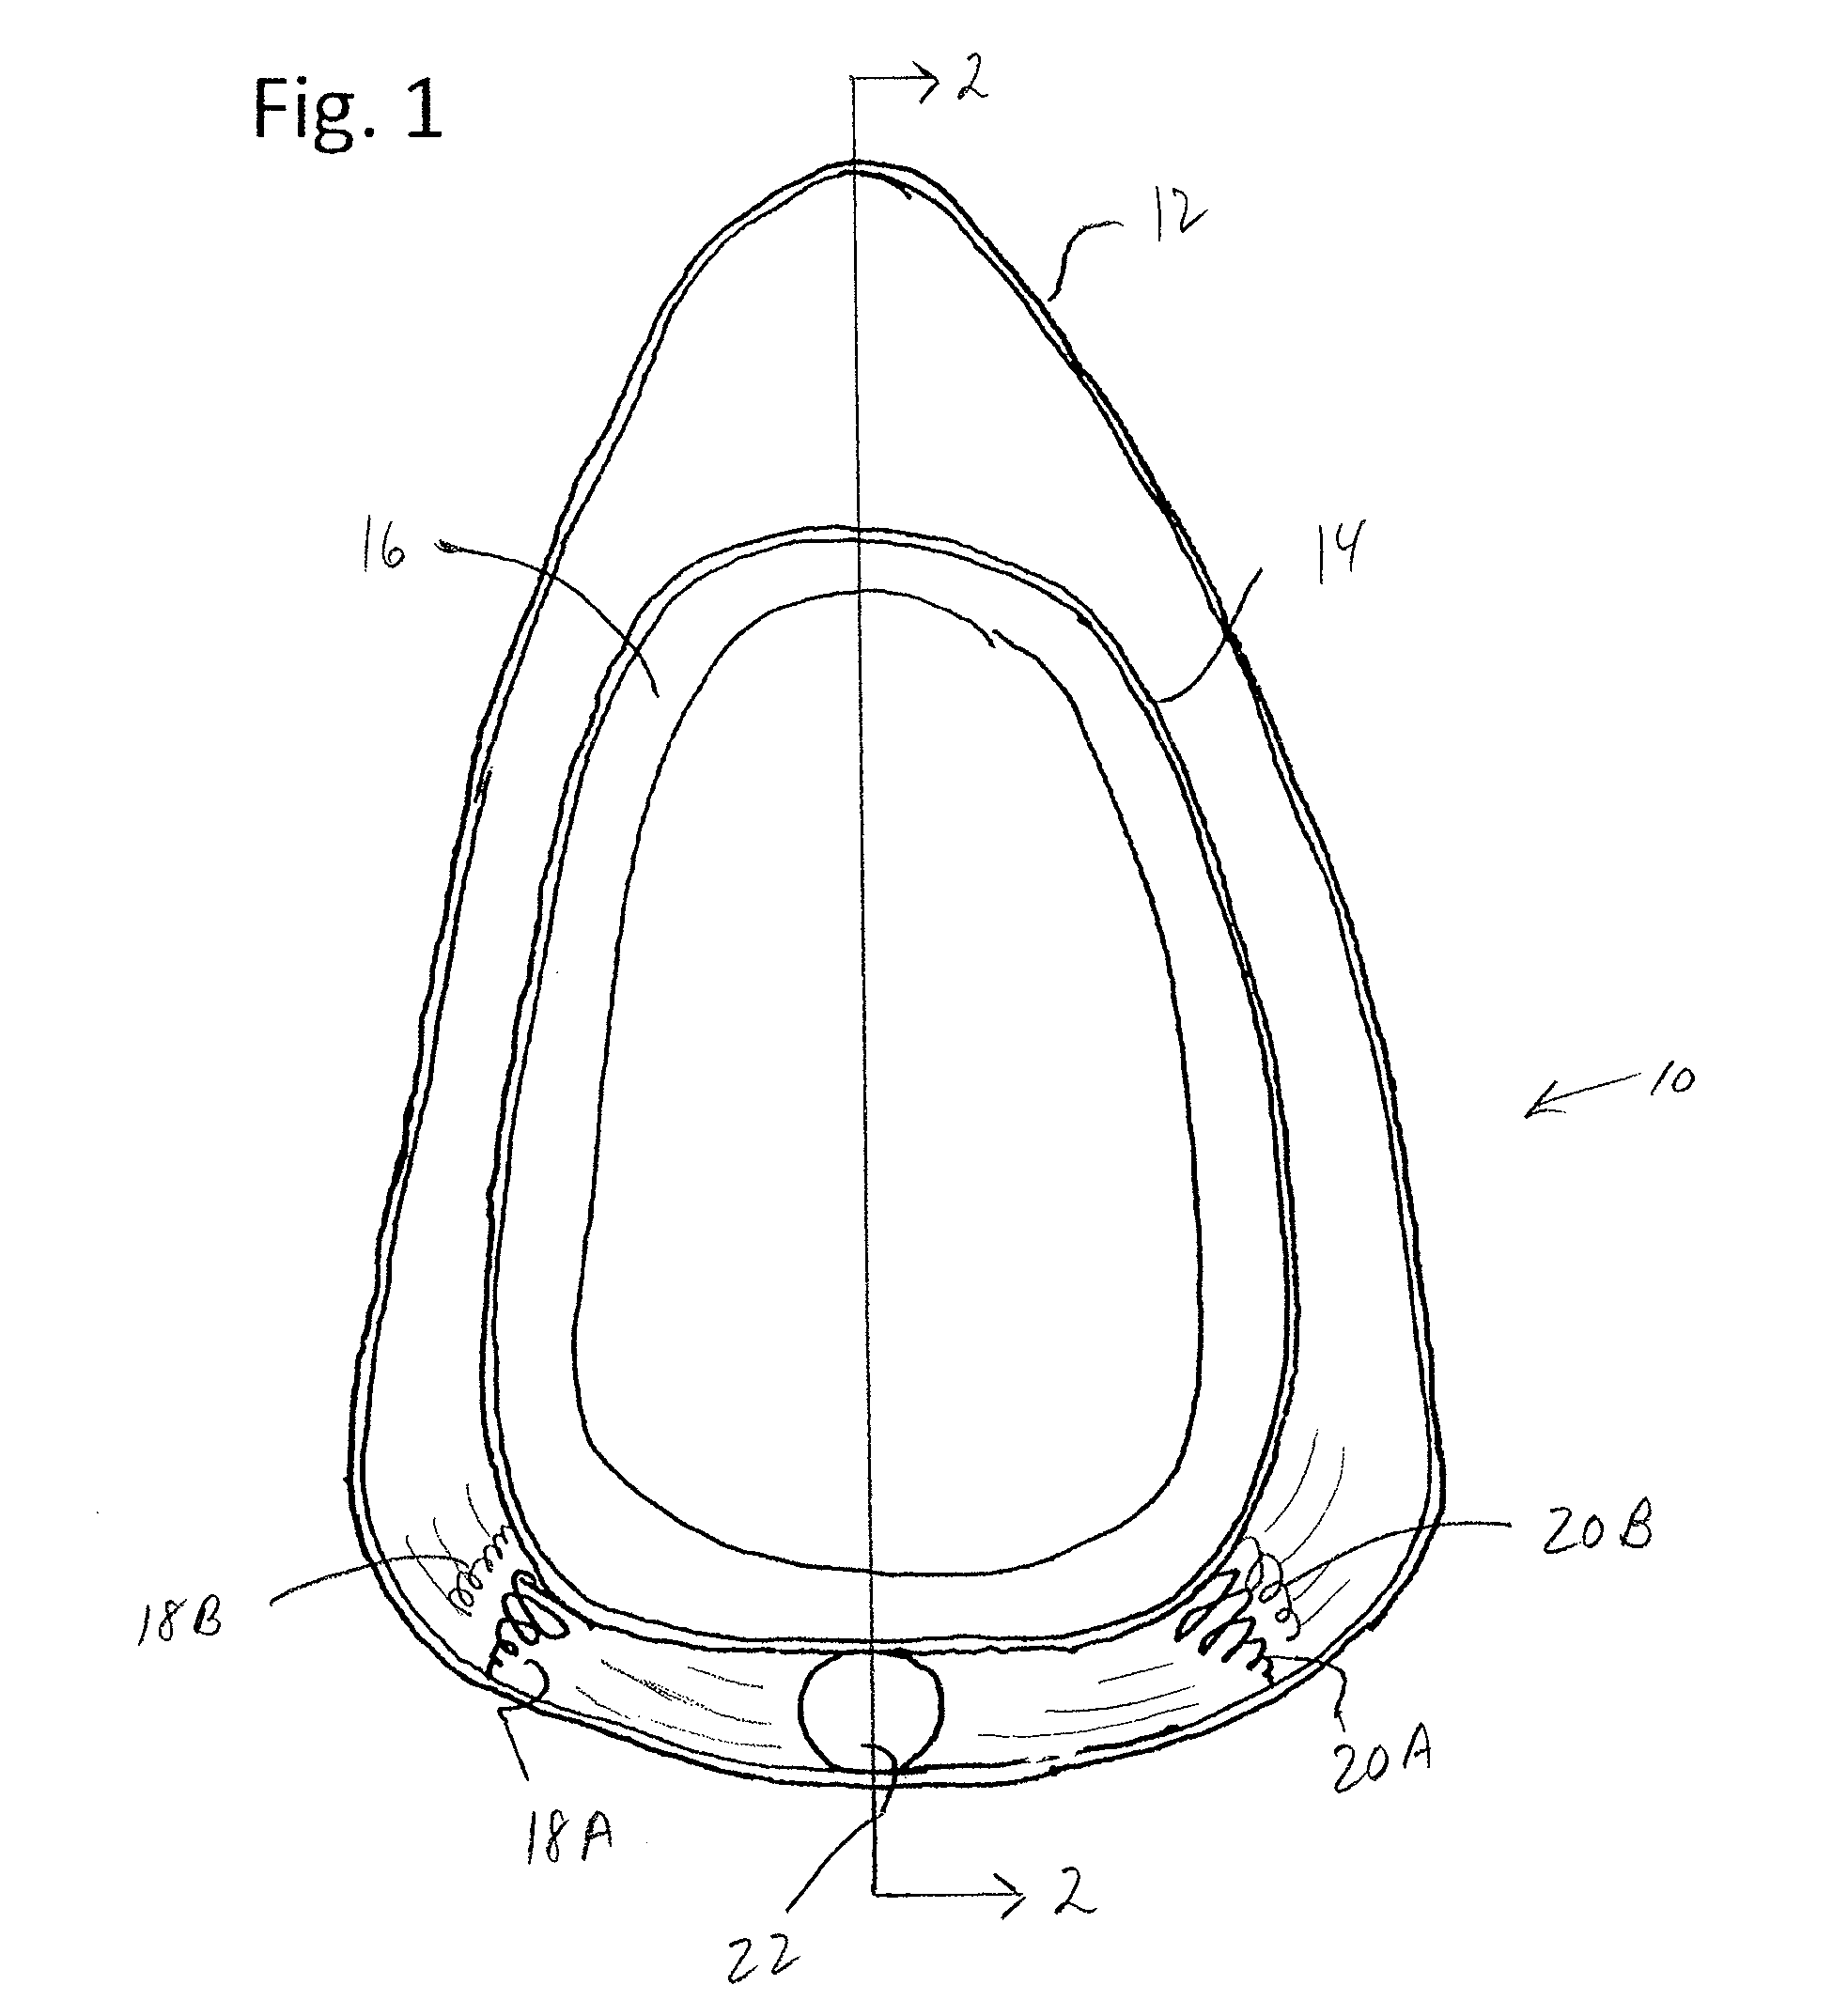 Energy dissipation system for a helmet